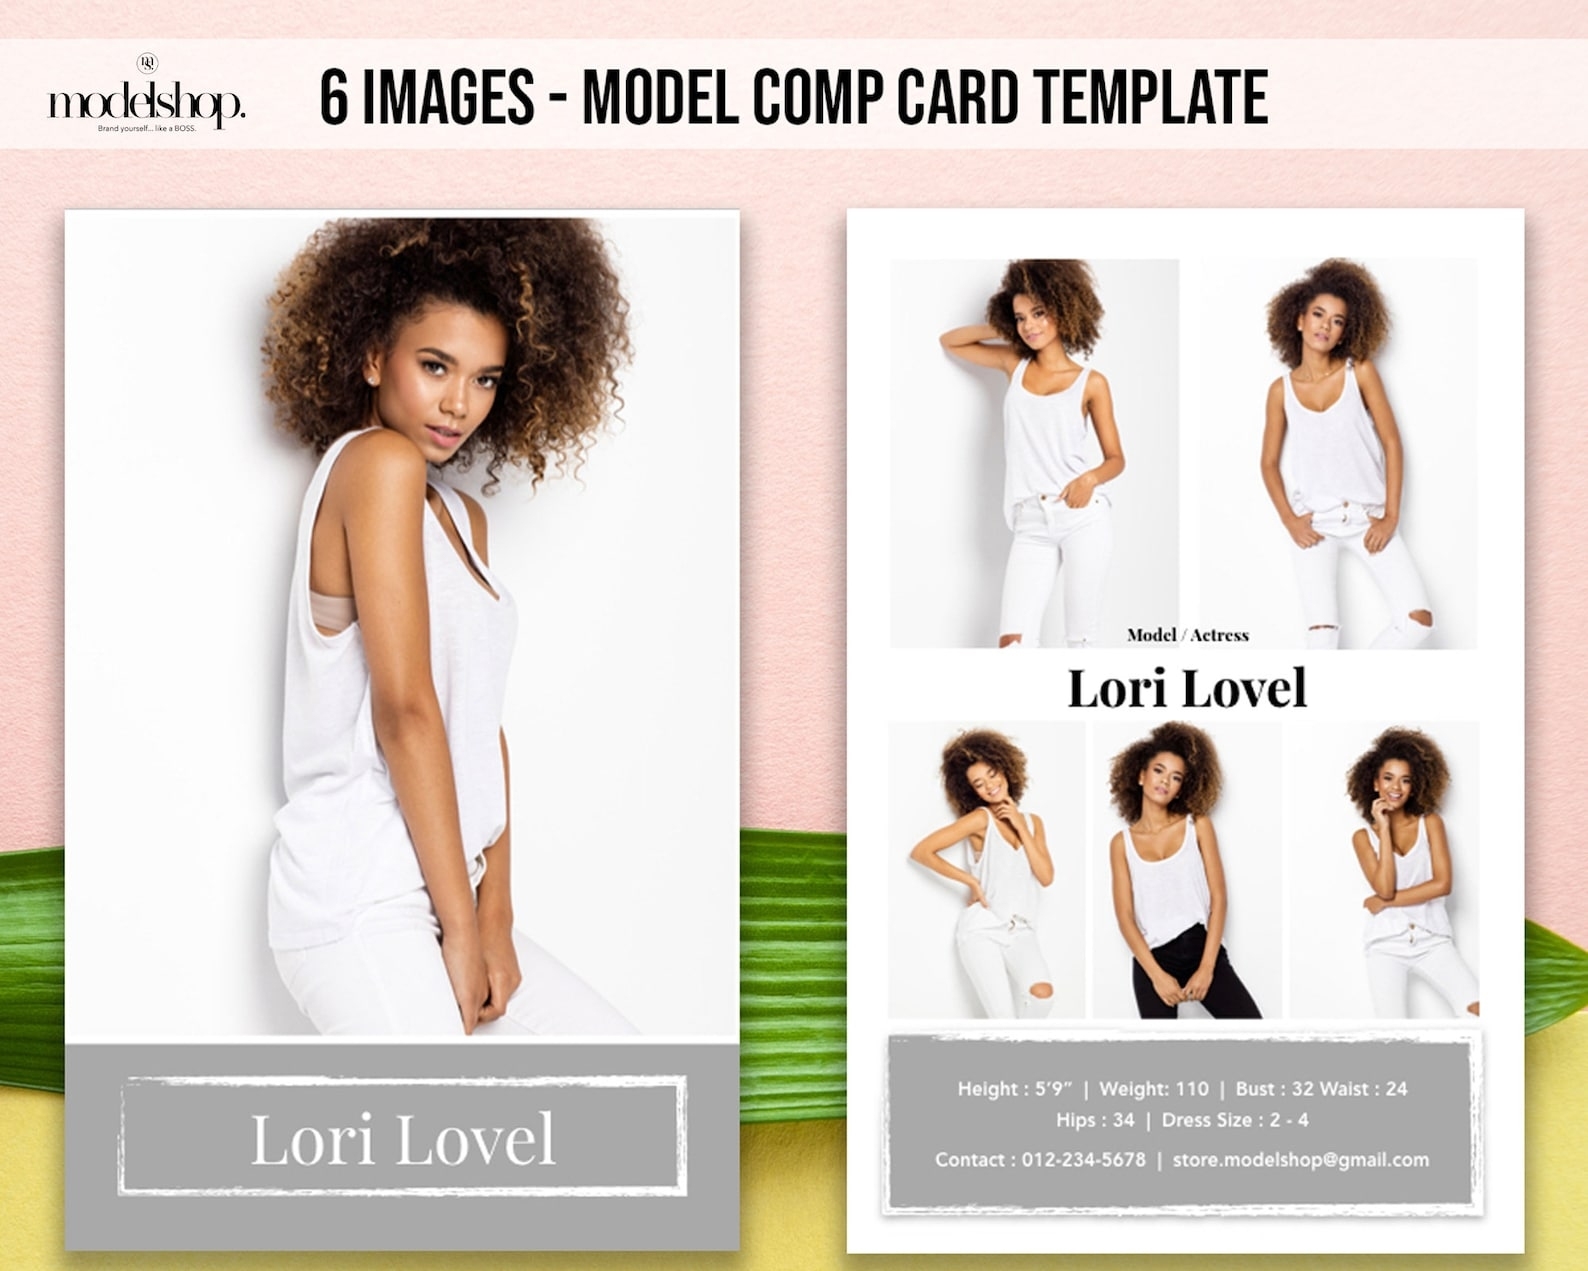 Modeling Comp Card 6 Image Model Comp Card Template Actor | Etsy pertaining to Comp Card Template Download